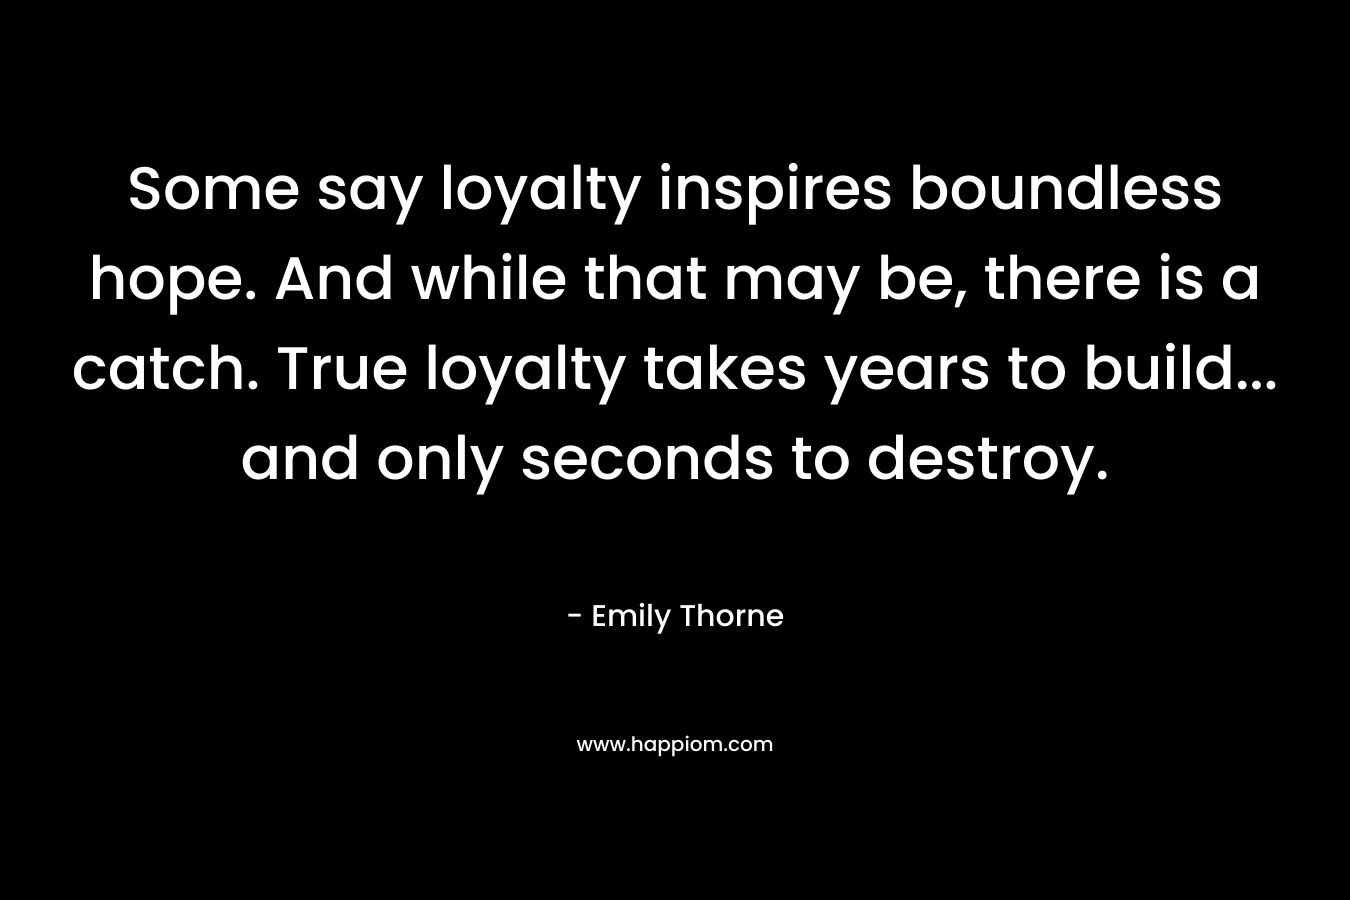 Some say loyalty inspires boundless hope. And while that may be, there is a catch. True loyalty takes years to build… and only seconds to destroy. – Emily Thorne